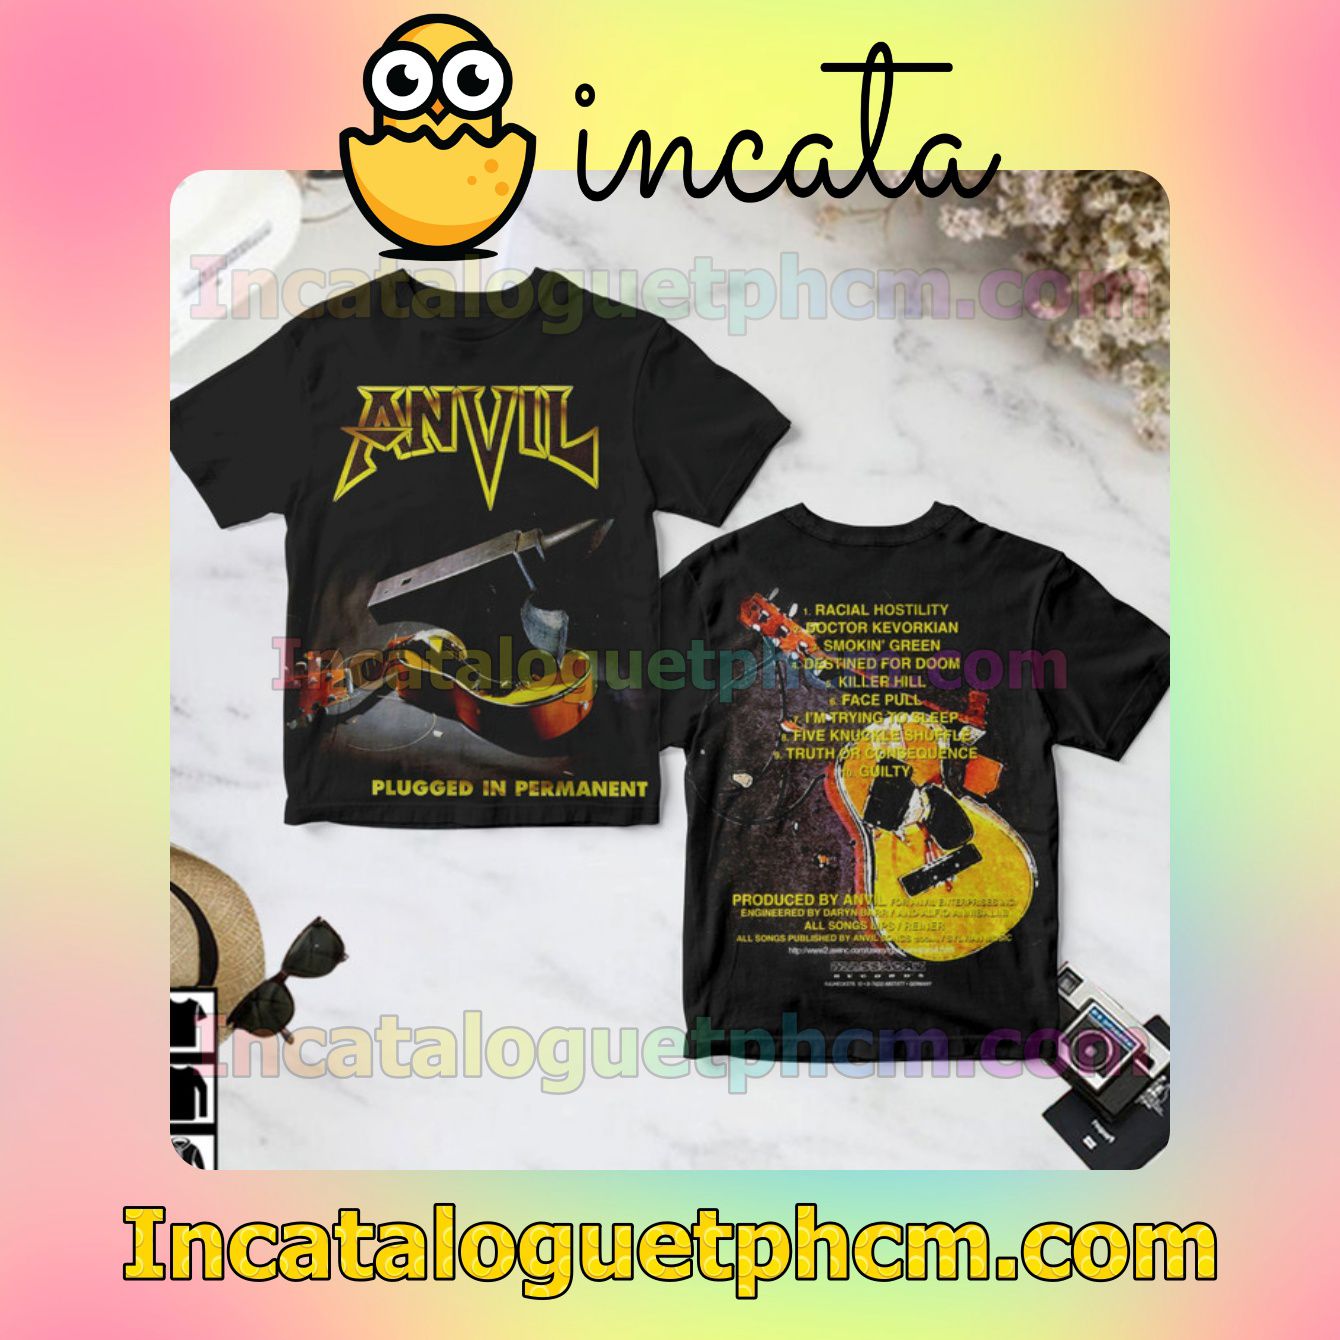 Hot Anvil Plugged In Permanent Album Cover Gift T-shirts